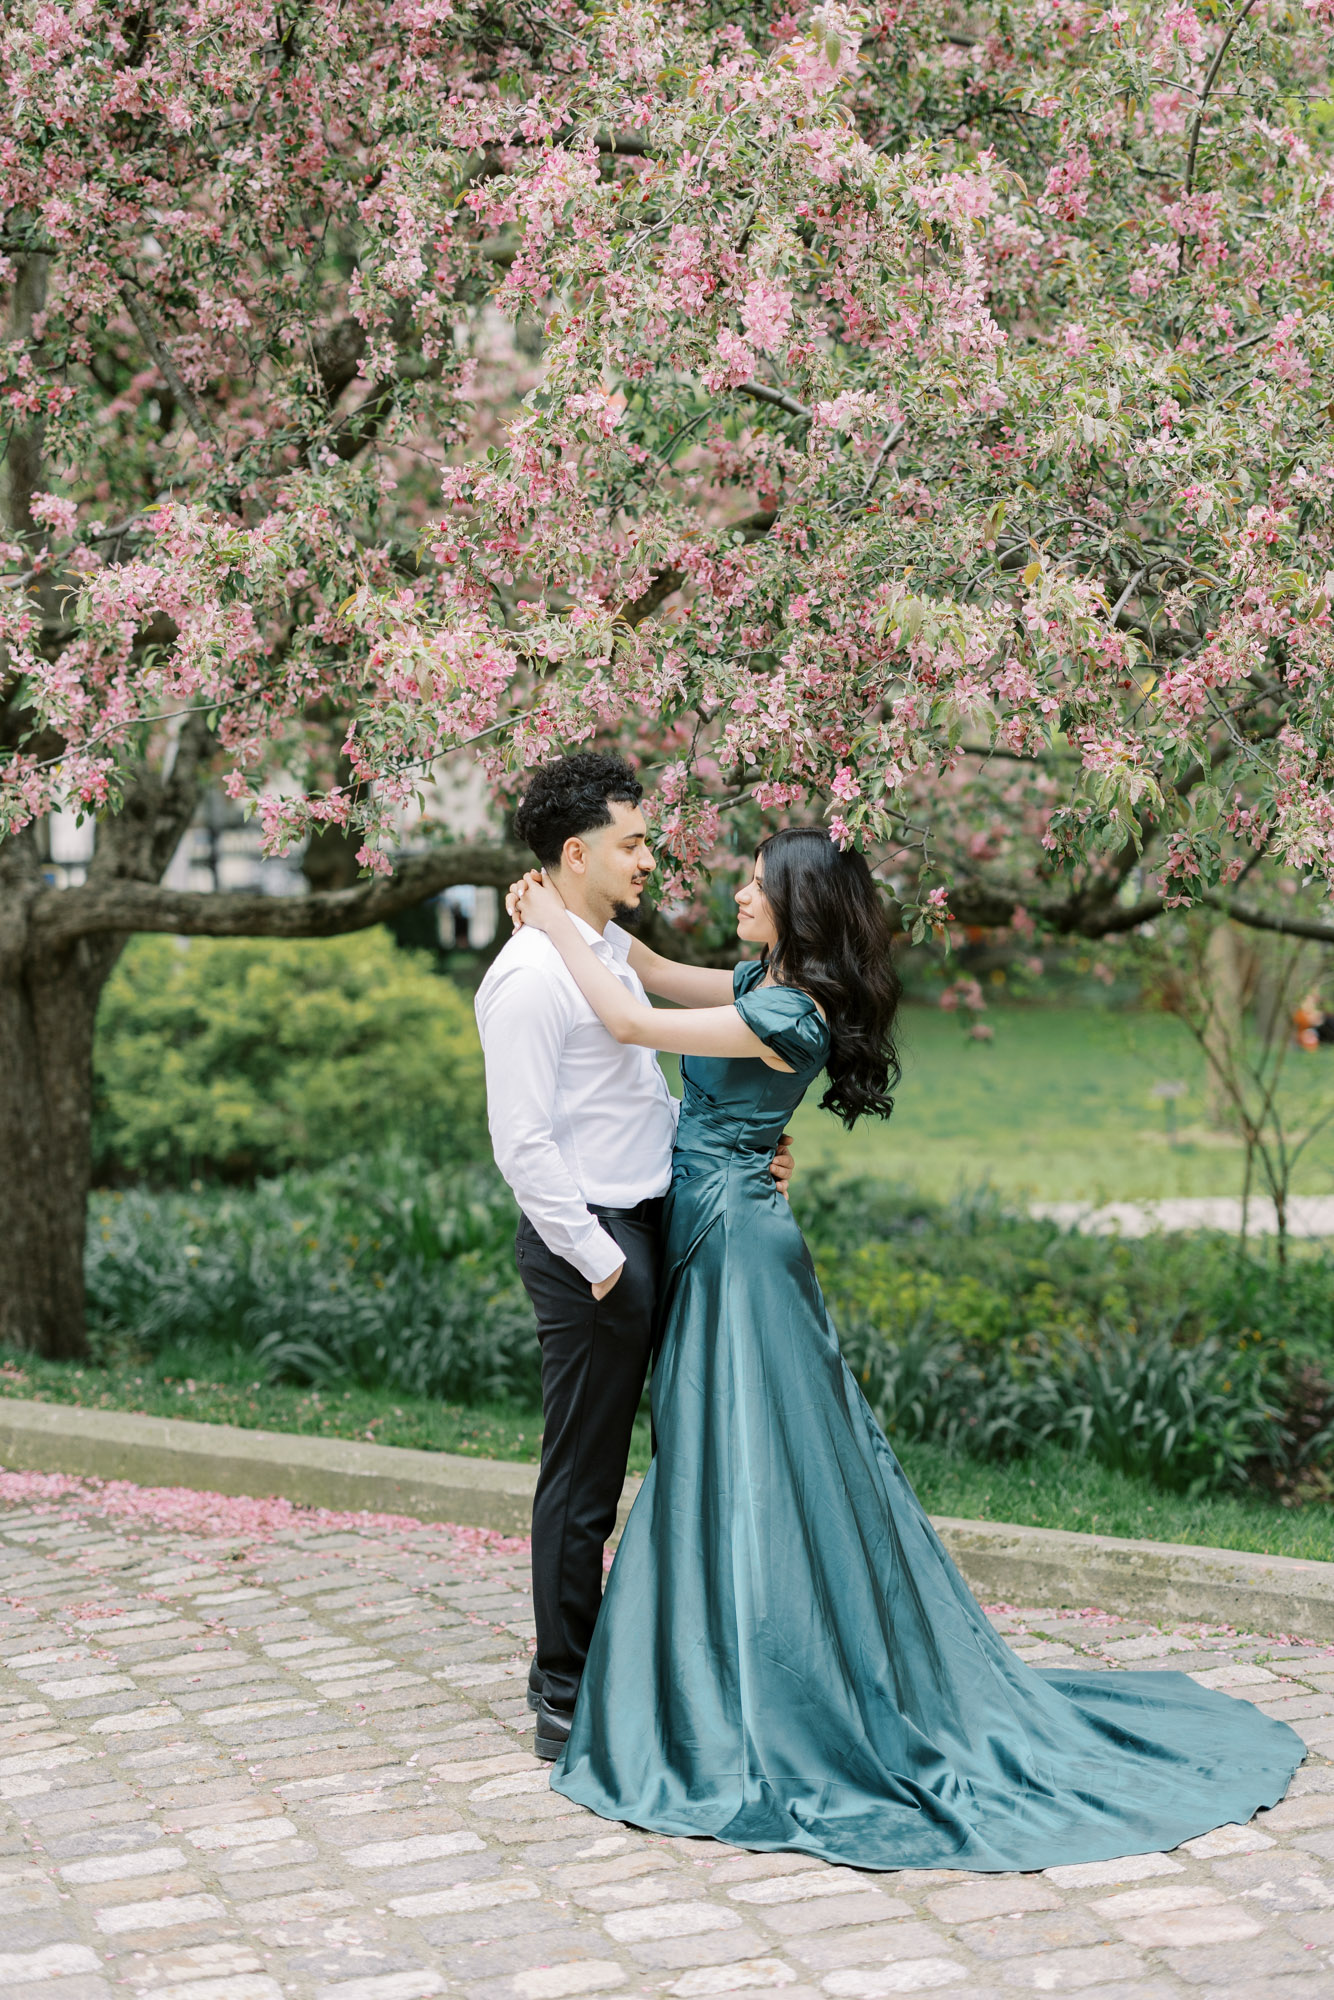 Couple holding on each other under a tree with pink flower blooms